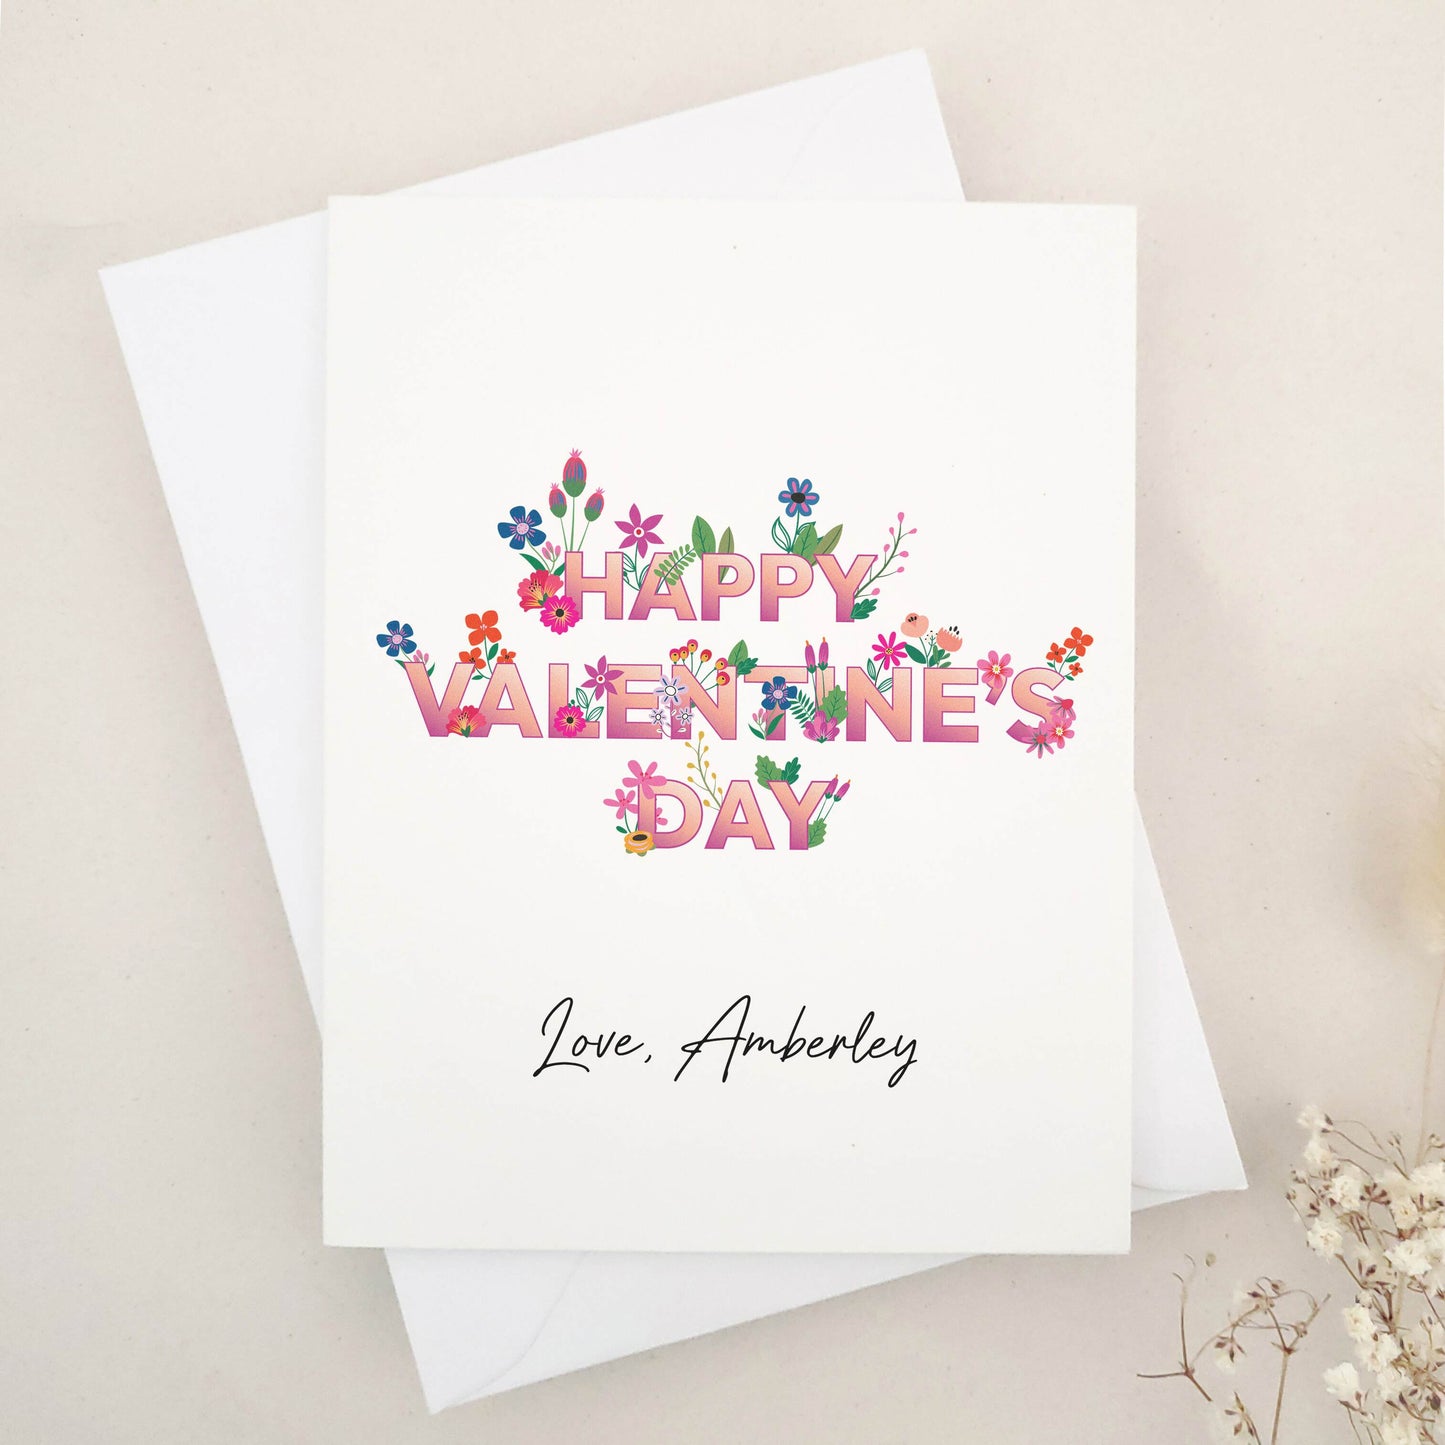 Celebrate Valentine's Day with our stunning Happy Valentine's Day cards, perfect for sharing heartfelt wishes with your best friend, girlfriend, or boyfriend. The design features an elegant blend of floral elements, bold typography, and calligraphy-style signature, symbolizing love and affection.